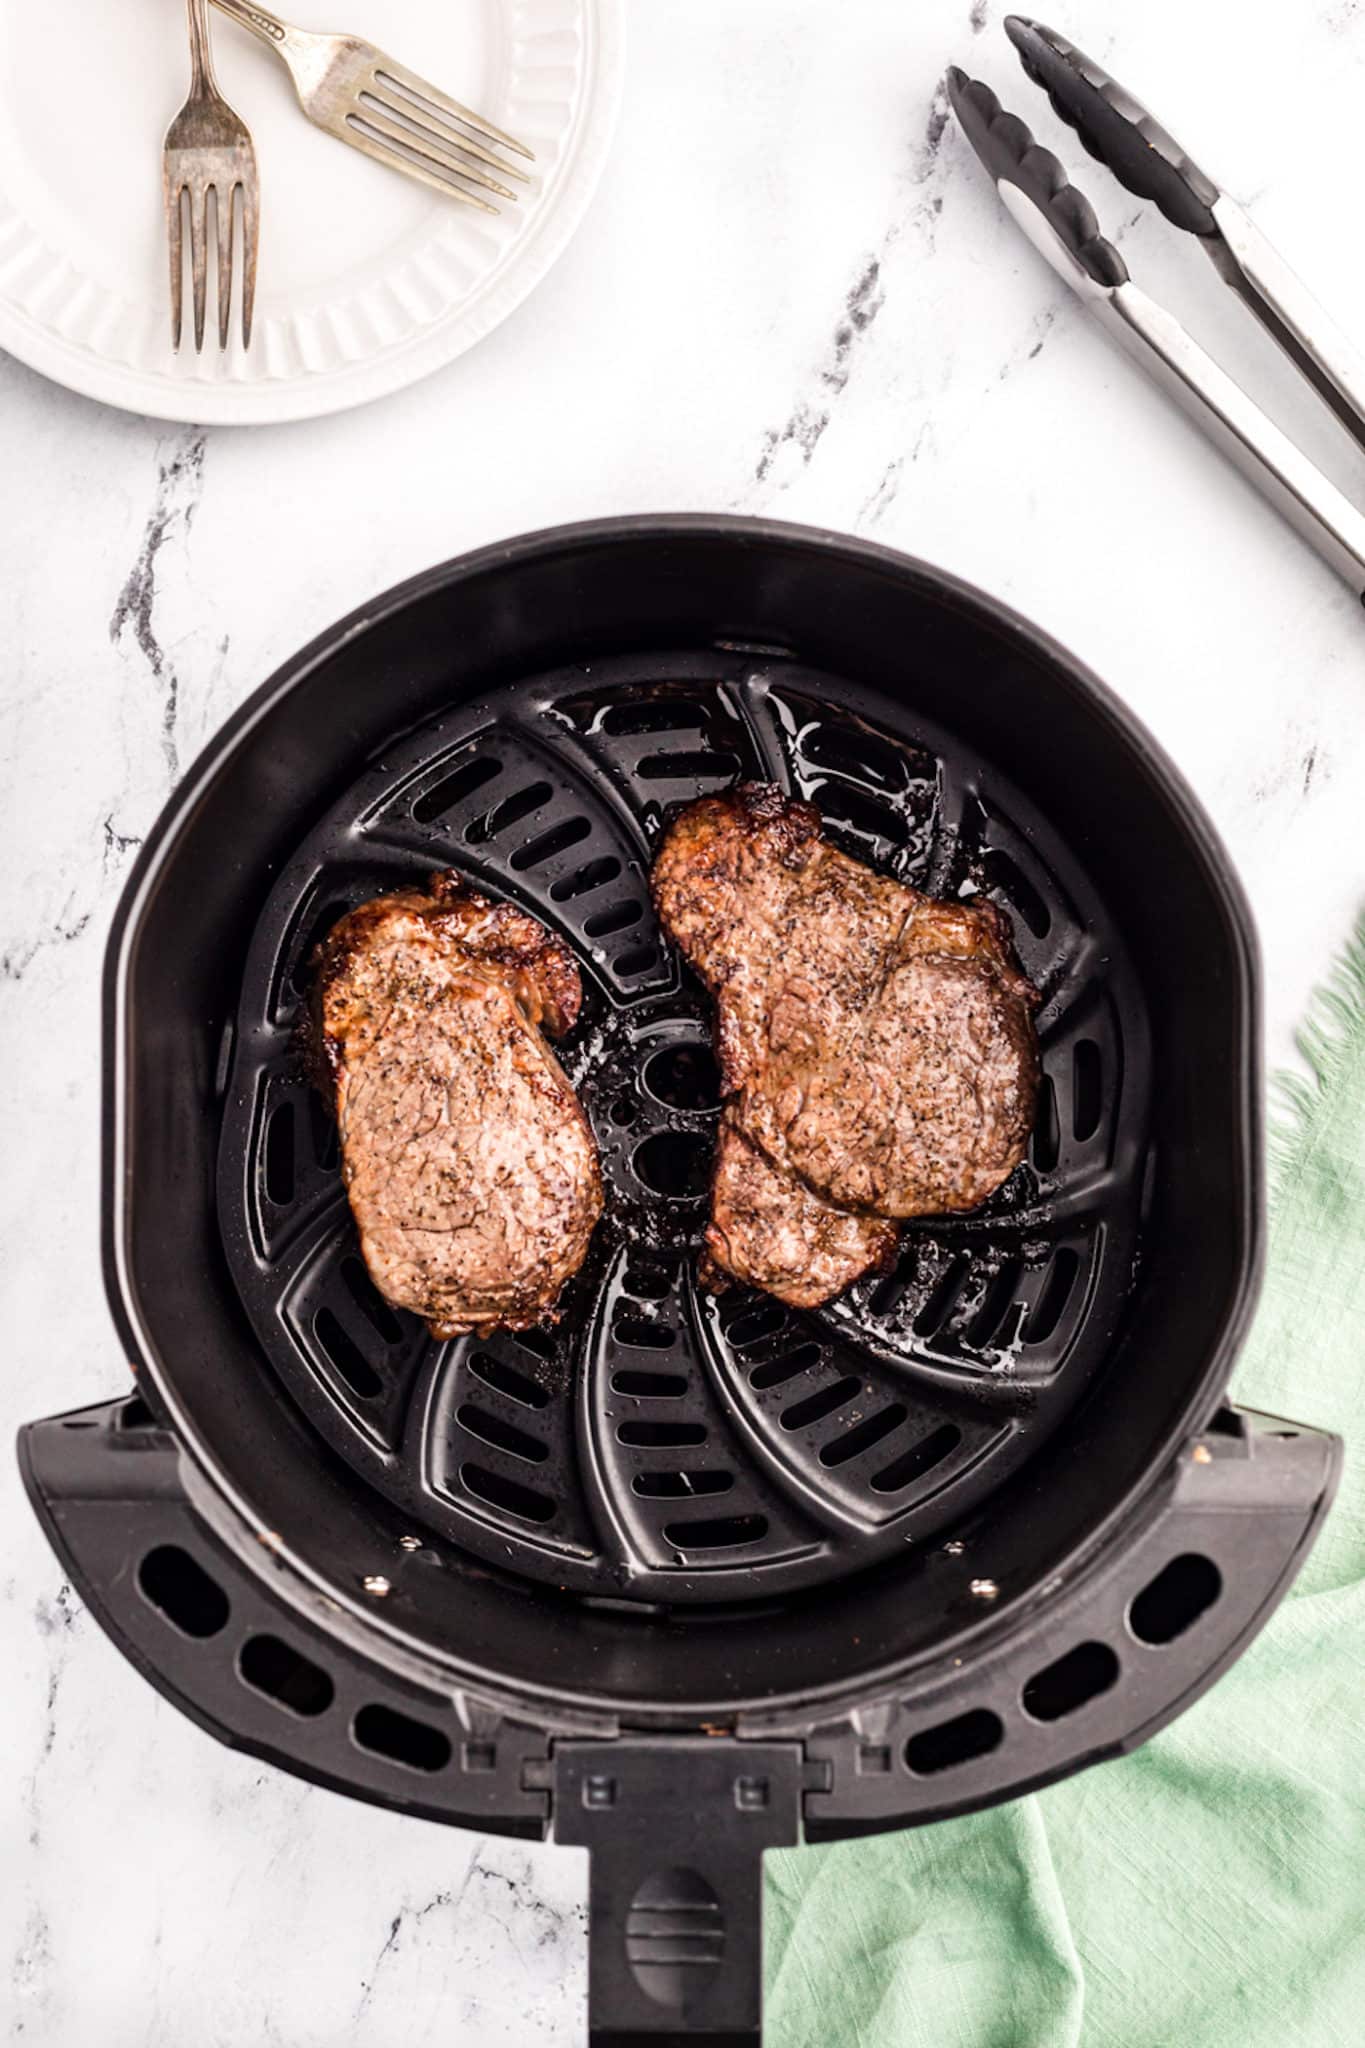 How To Cook A Filet Mignon In An Air Fryer